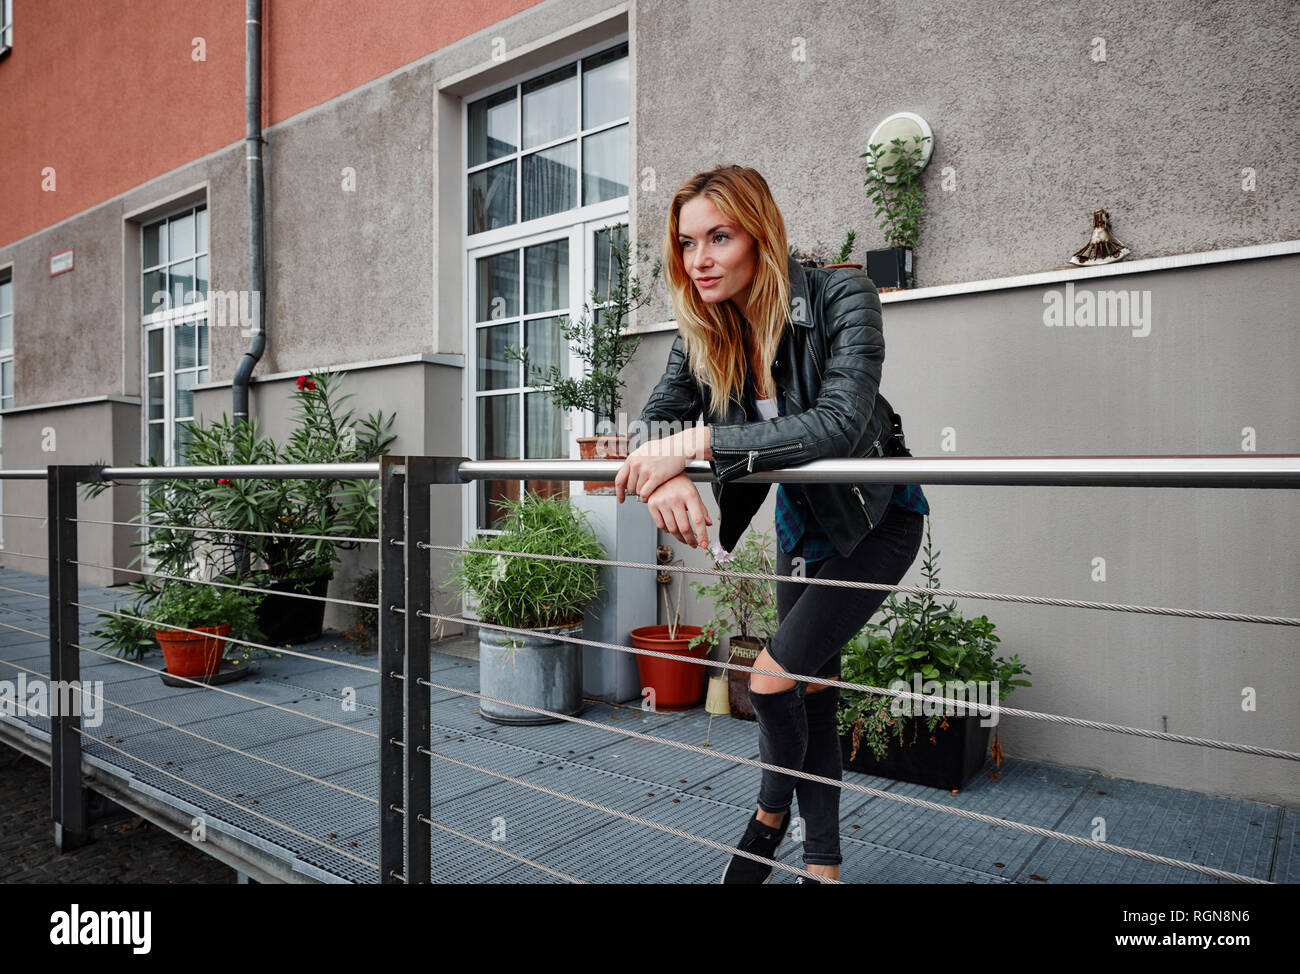 Confident young woman wearing biker jacket leaning on balcony railing Stock Photo